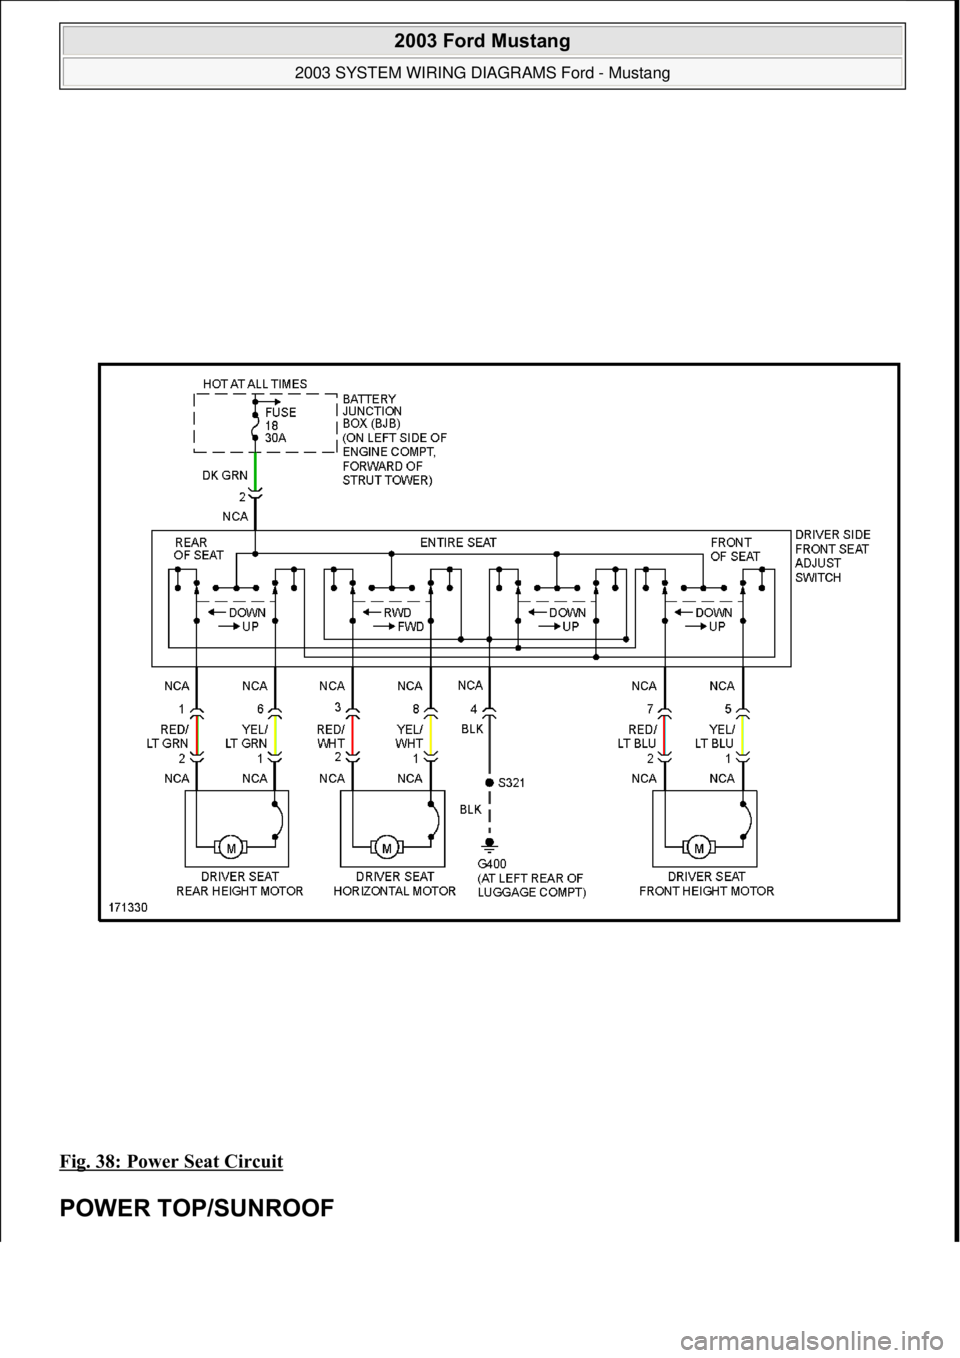 FORD MUSTANG 2003  Workshop Manual Fig. 38: Power Seat Circuit 
POWER TOP/SUNROOF 
 
2003 Ford Mustang 
2003 SYSTEM WIRING DIAGRAMS Ford - Mustang  
111  
18 ноября  2011 г. 12:45:09Page 39 © 2006 Mitchell Repair Information Co